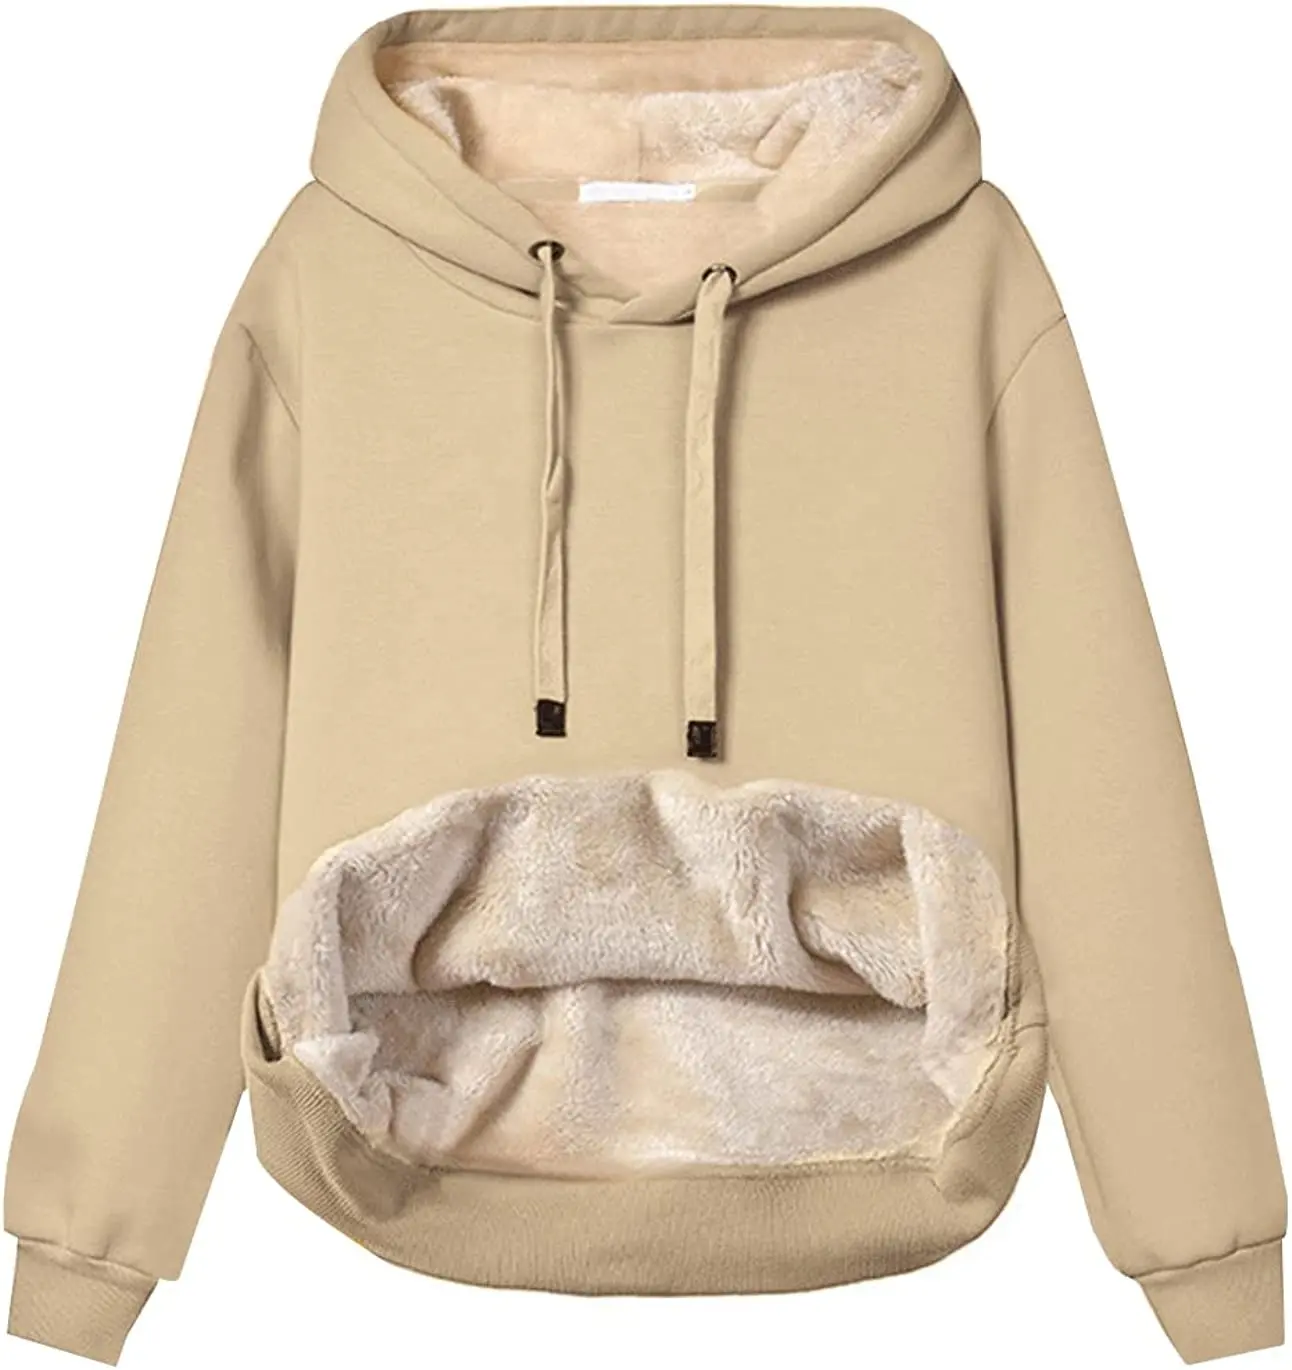 High Quality Women's Fashion Casual Winter Warm Fleece Sherpa Lined Pullover Hooded Sweatshirt Hoodie With Own Designs Hoodies